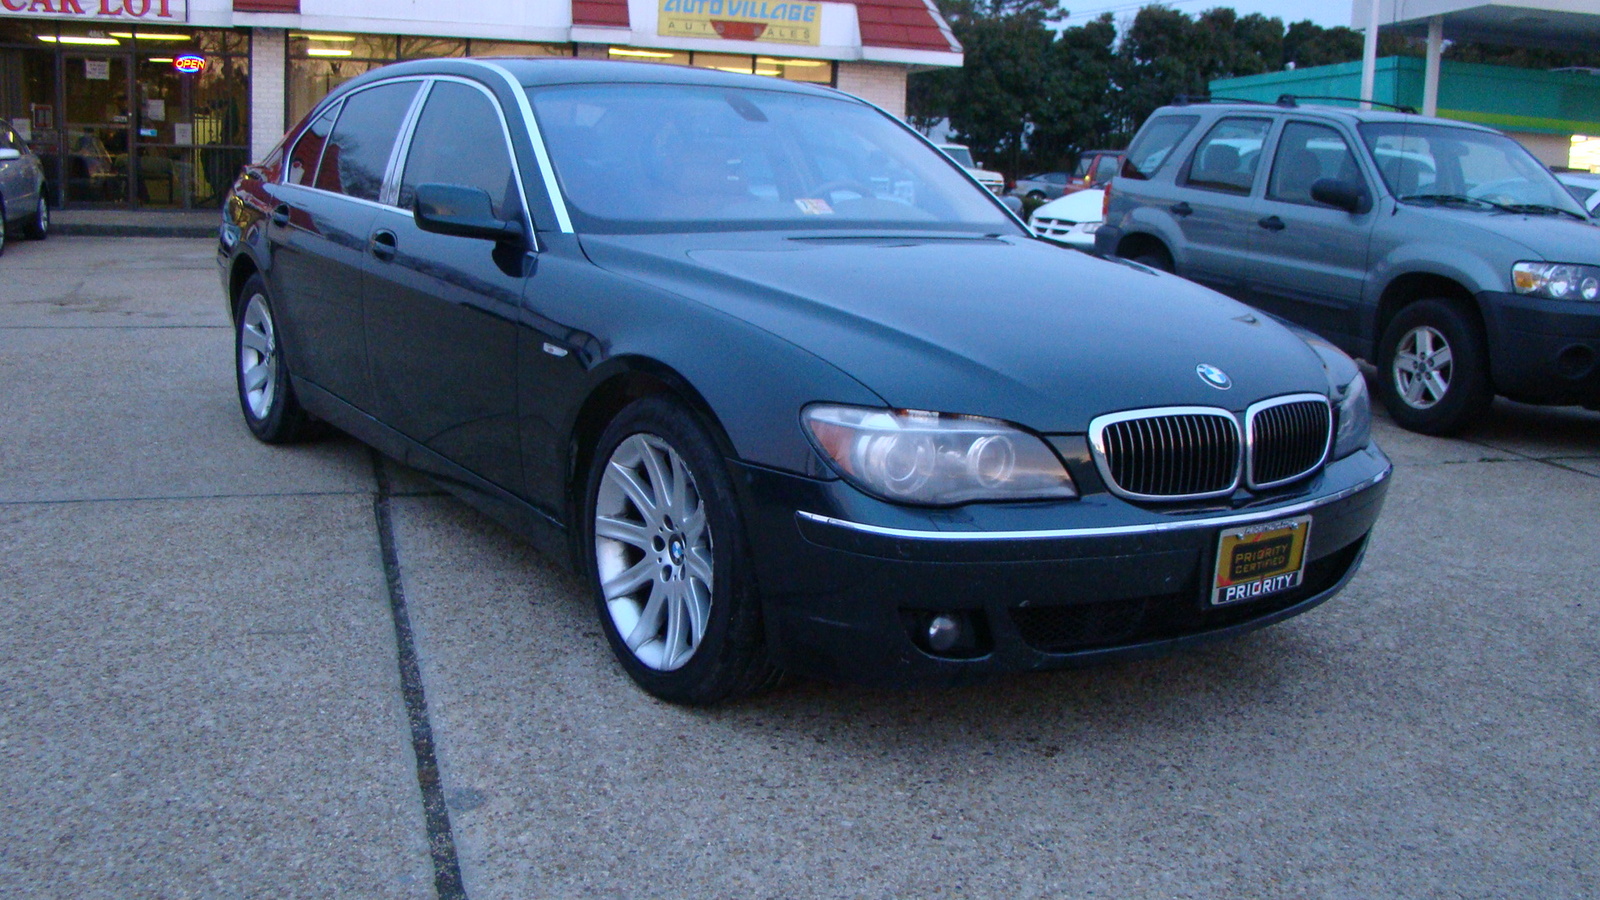 2006 Bmw 7 series consumer review #1